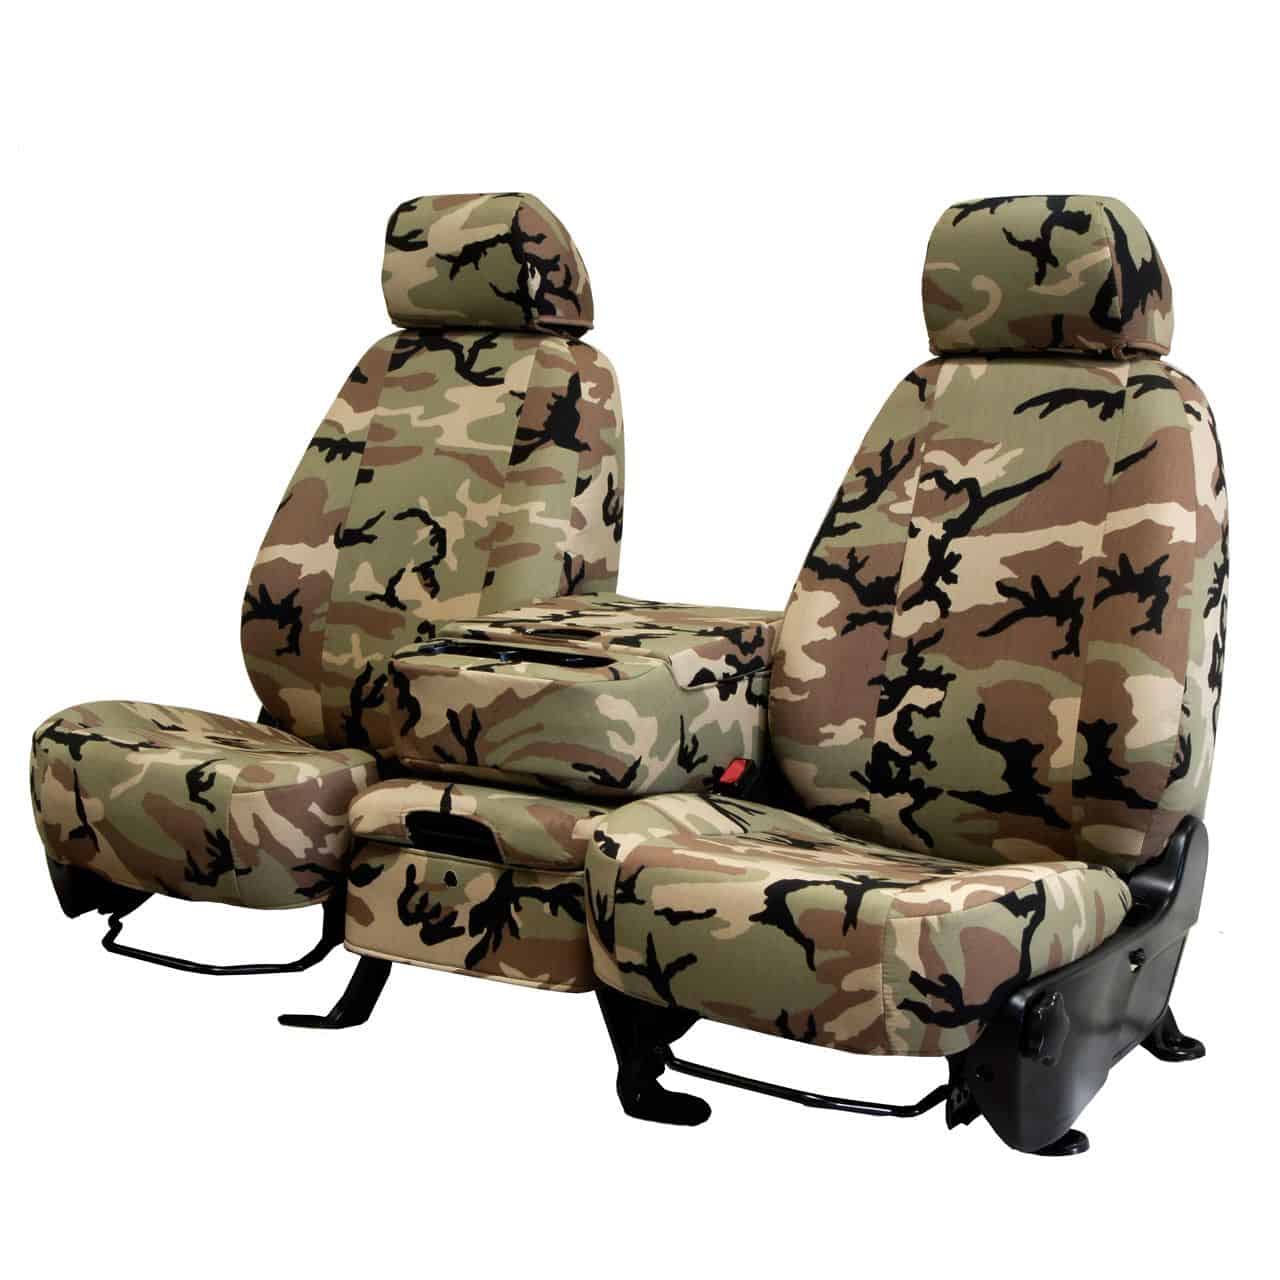 Retro Camo Seat Covers Great Accessory For Cars Trucks And Suv S - Camo Seat Covers For 2004 Chevy Tahoe